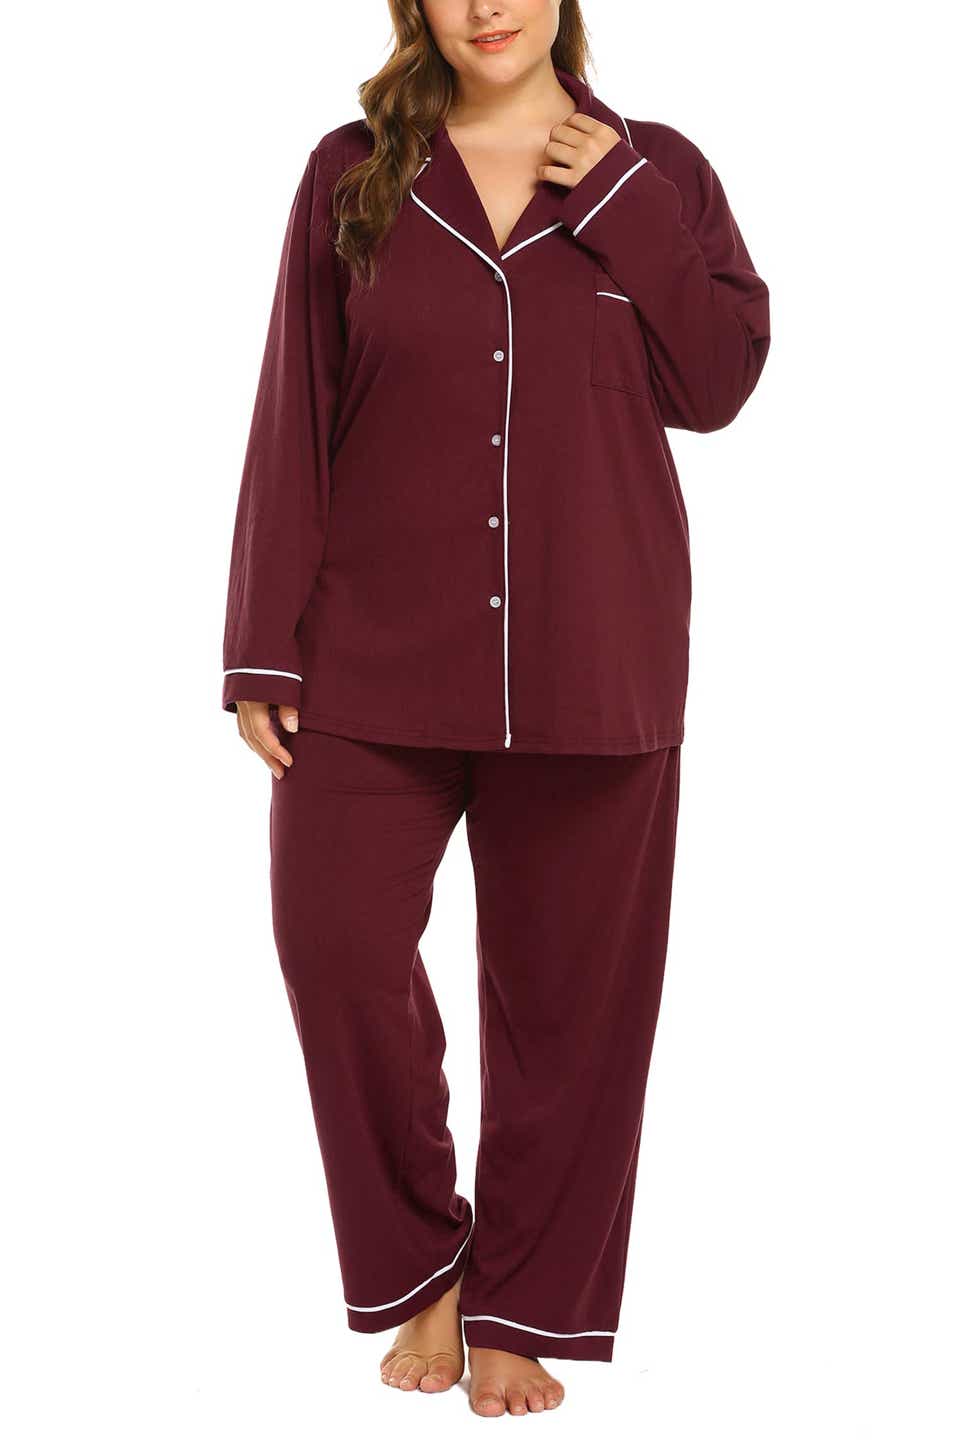 Plus-Size Pajamas Are Cute, Comfy, Affordable